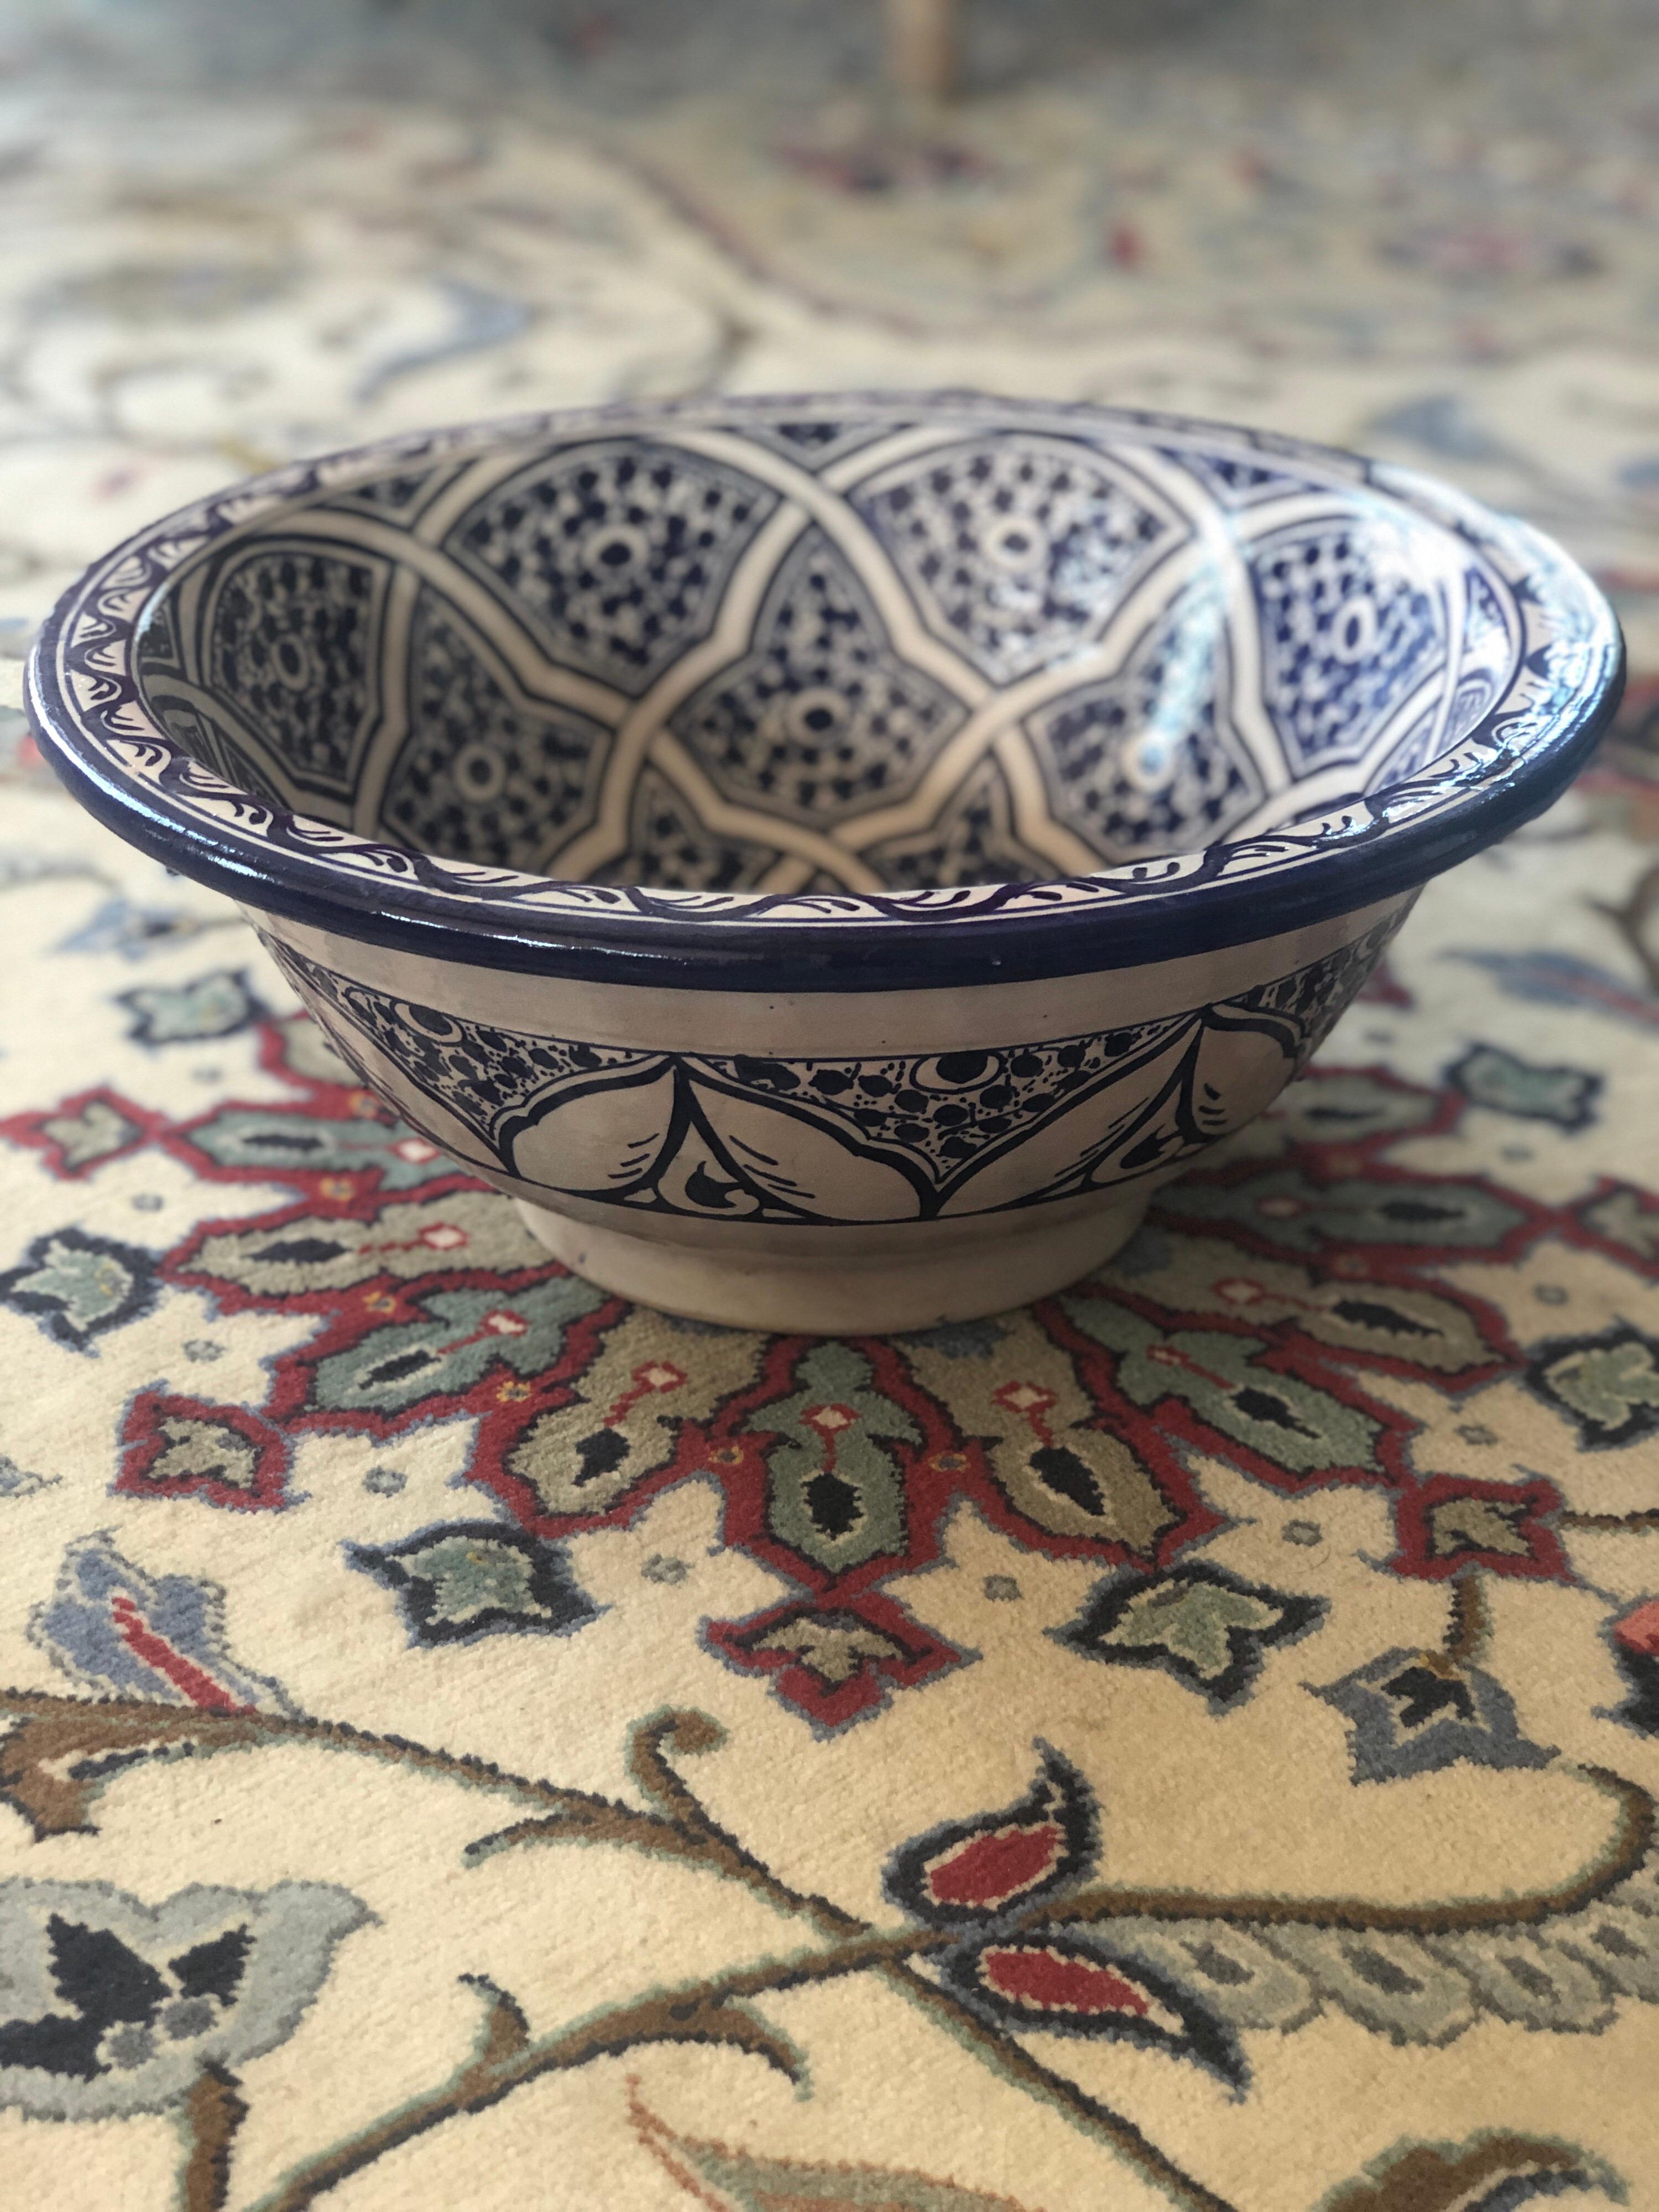 Hand-Painted 20th Century Moroccan Hand Painted Round Ceramic Sink in White and Blue